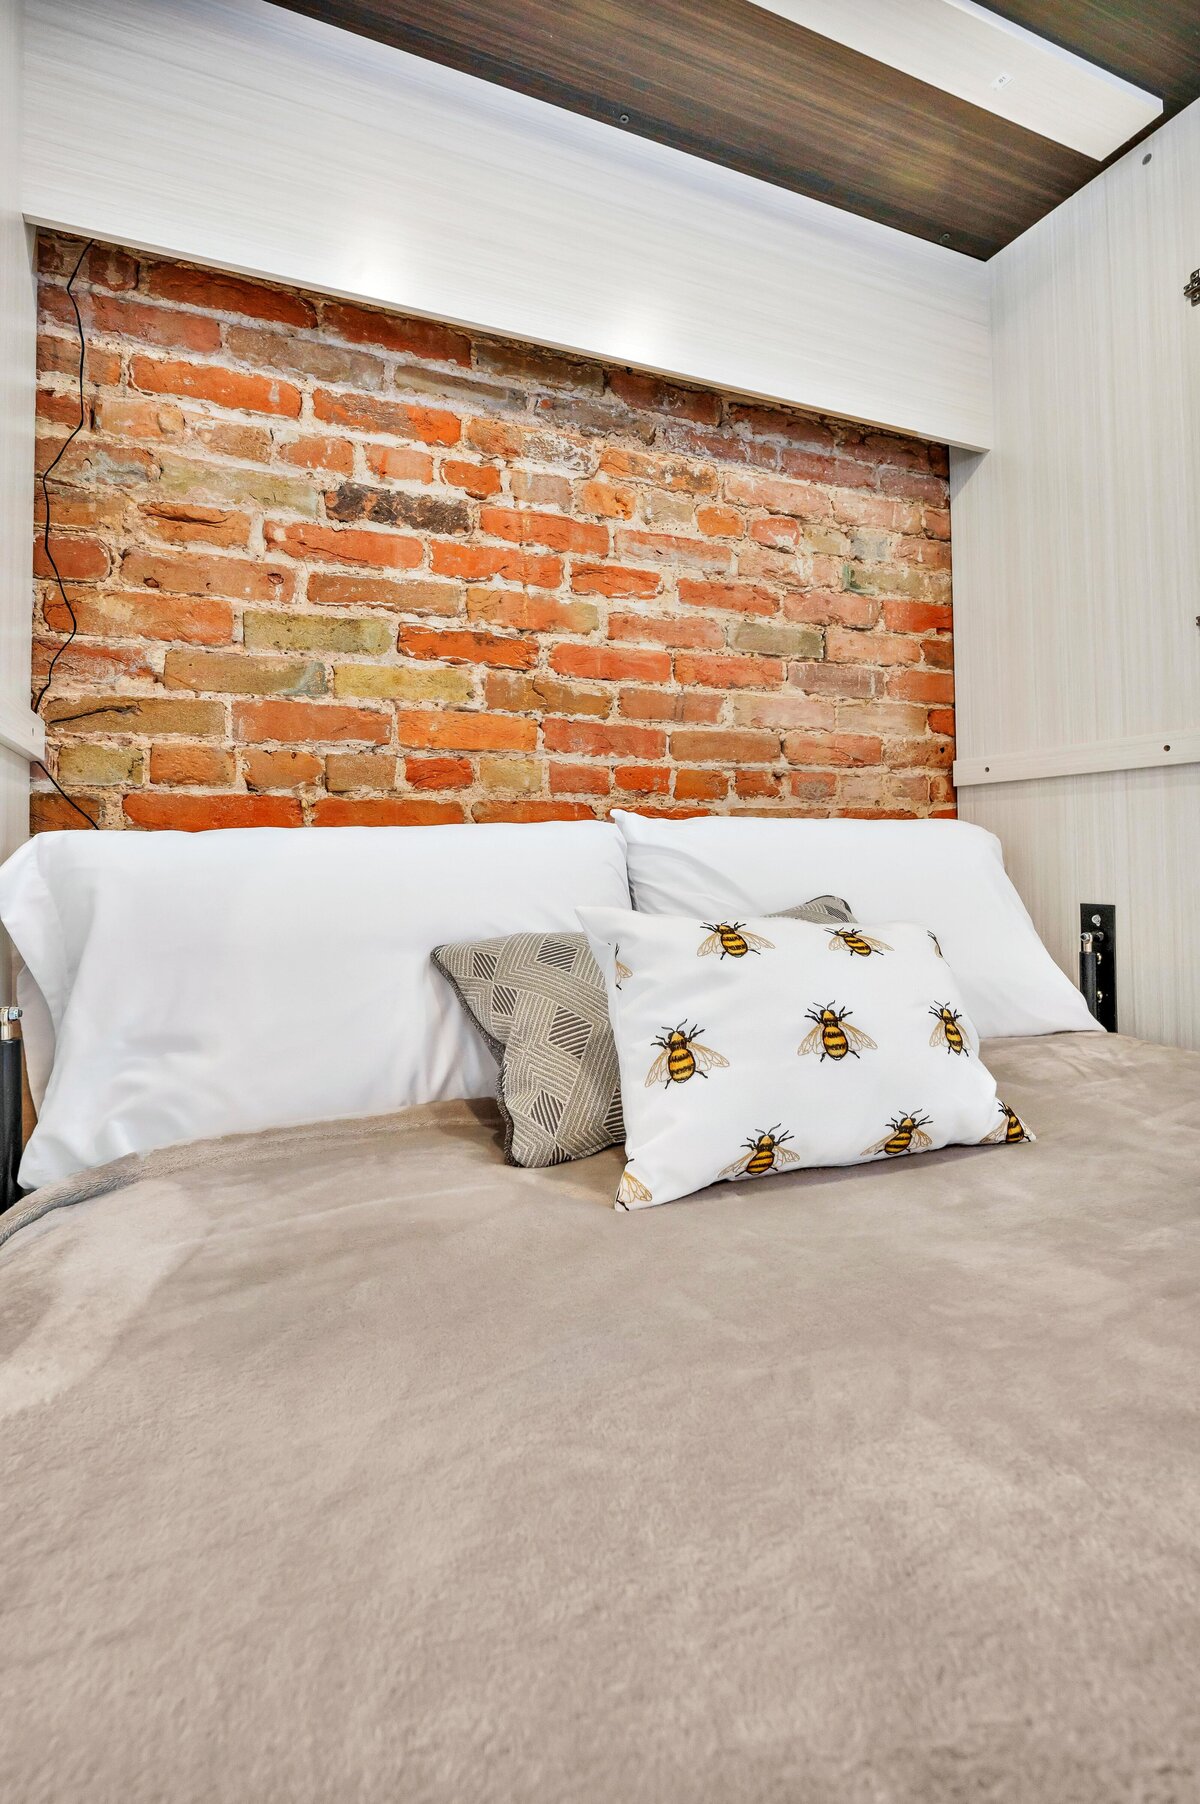 Check out this Murphy bed for two in the living room of this one-bedroom, one-bathroom vintage condo that sleeps 4 in the historic Behrens building in the heart of the Magnolia Silo District in downtown Waco, TX.